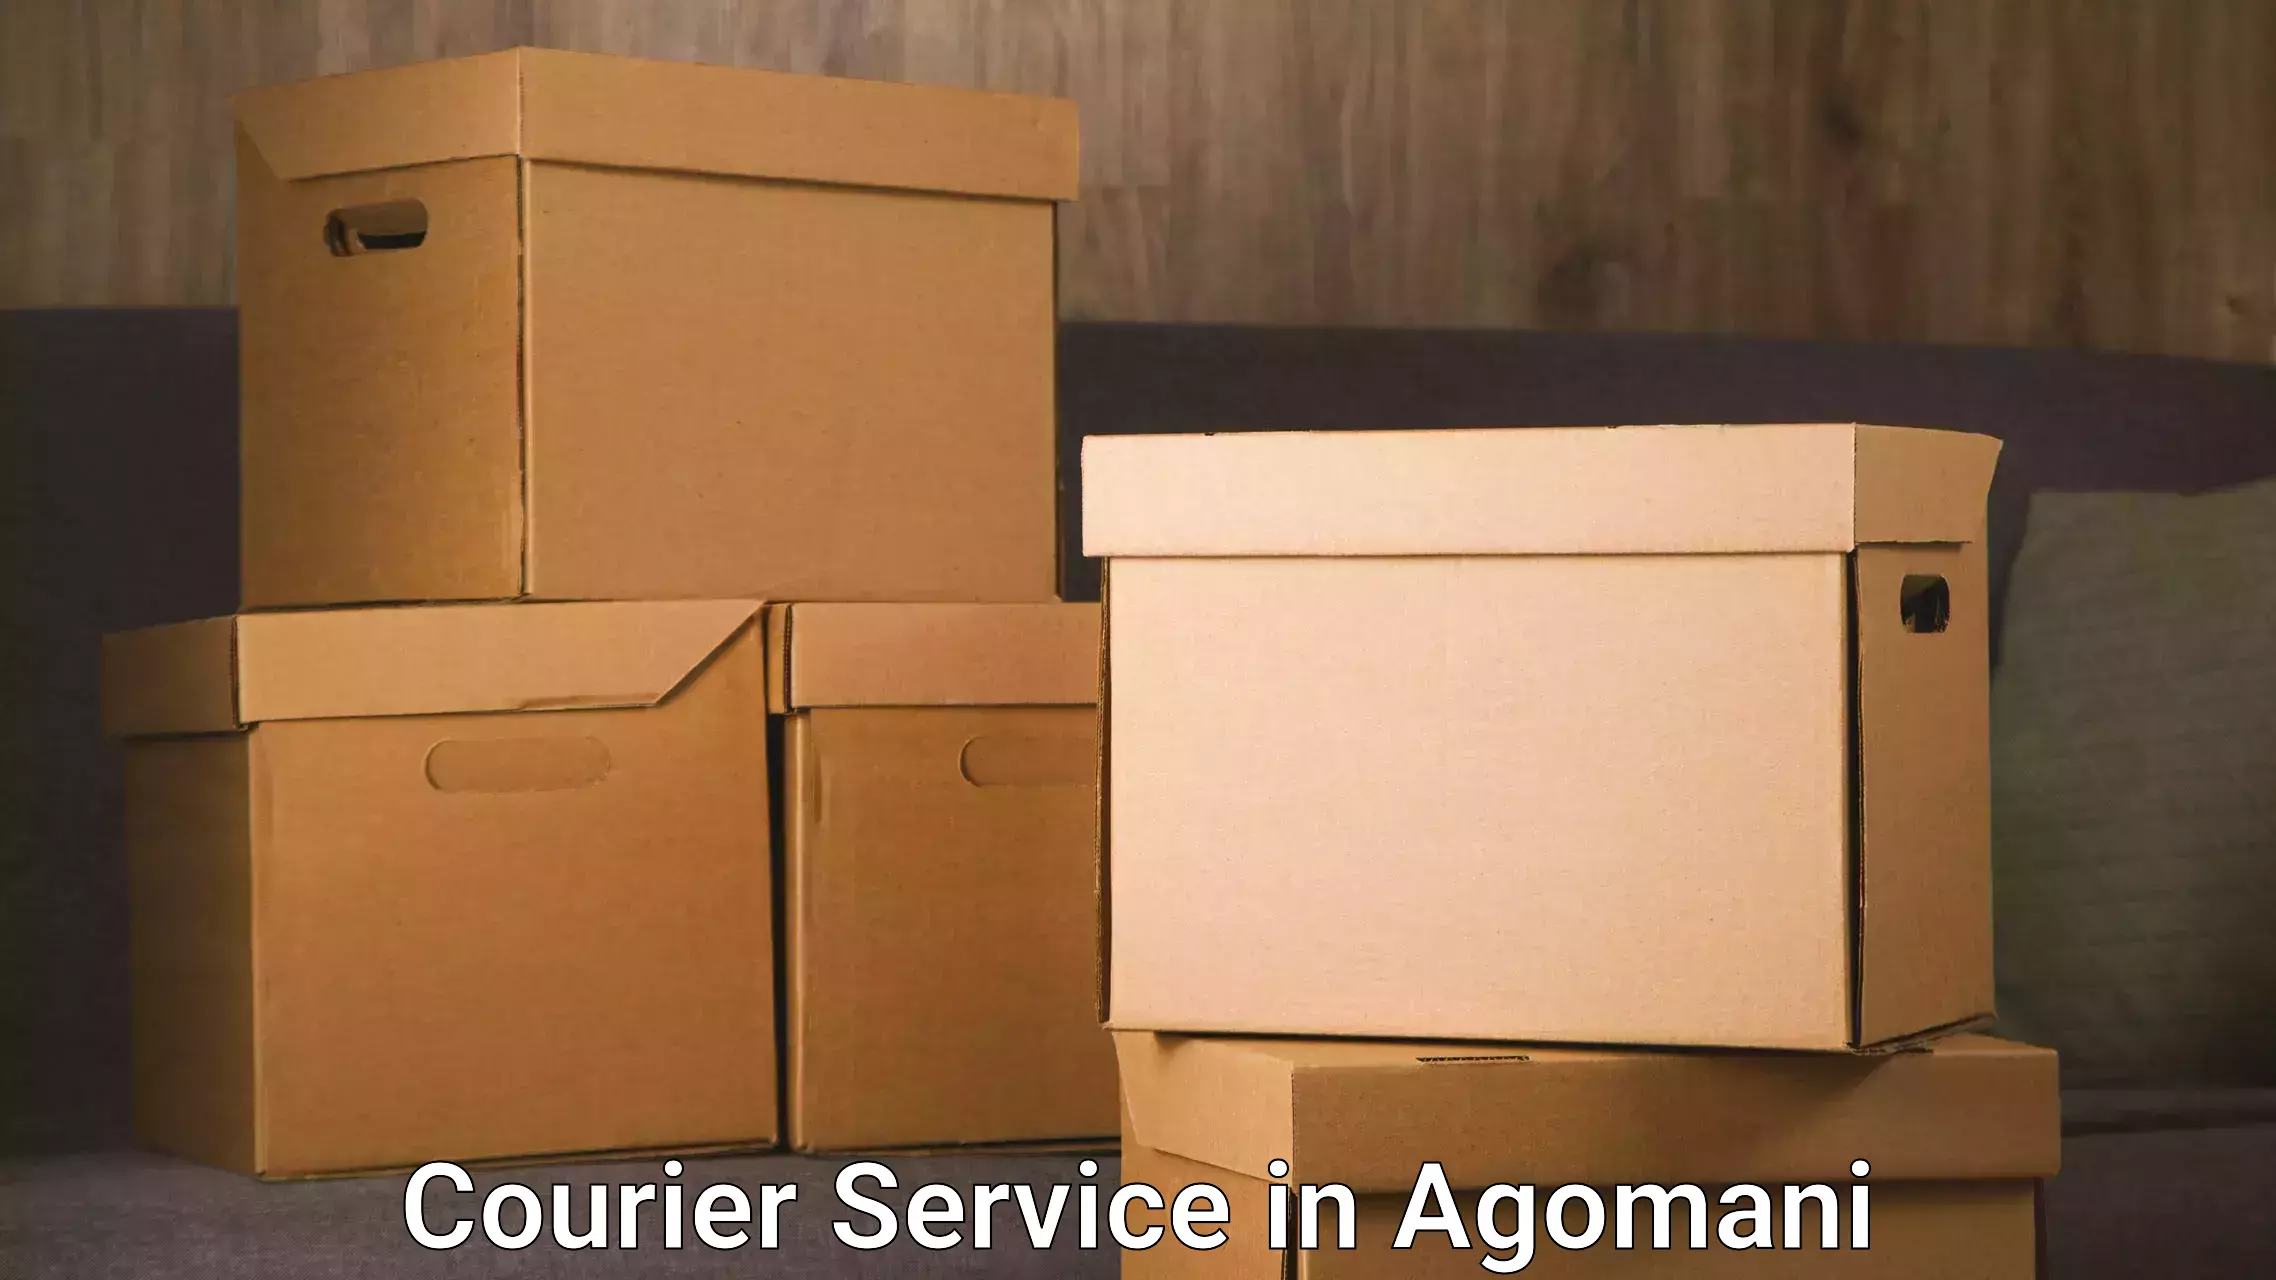 Innovative shipping solutions in Agomani